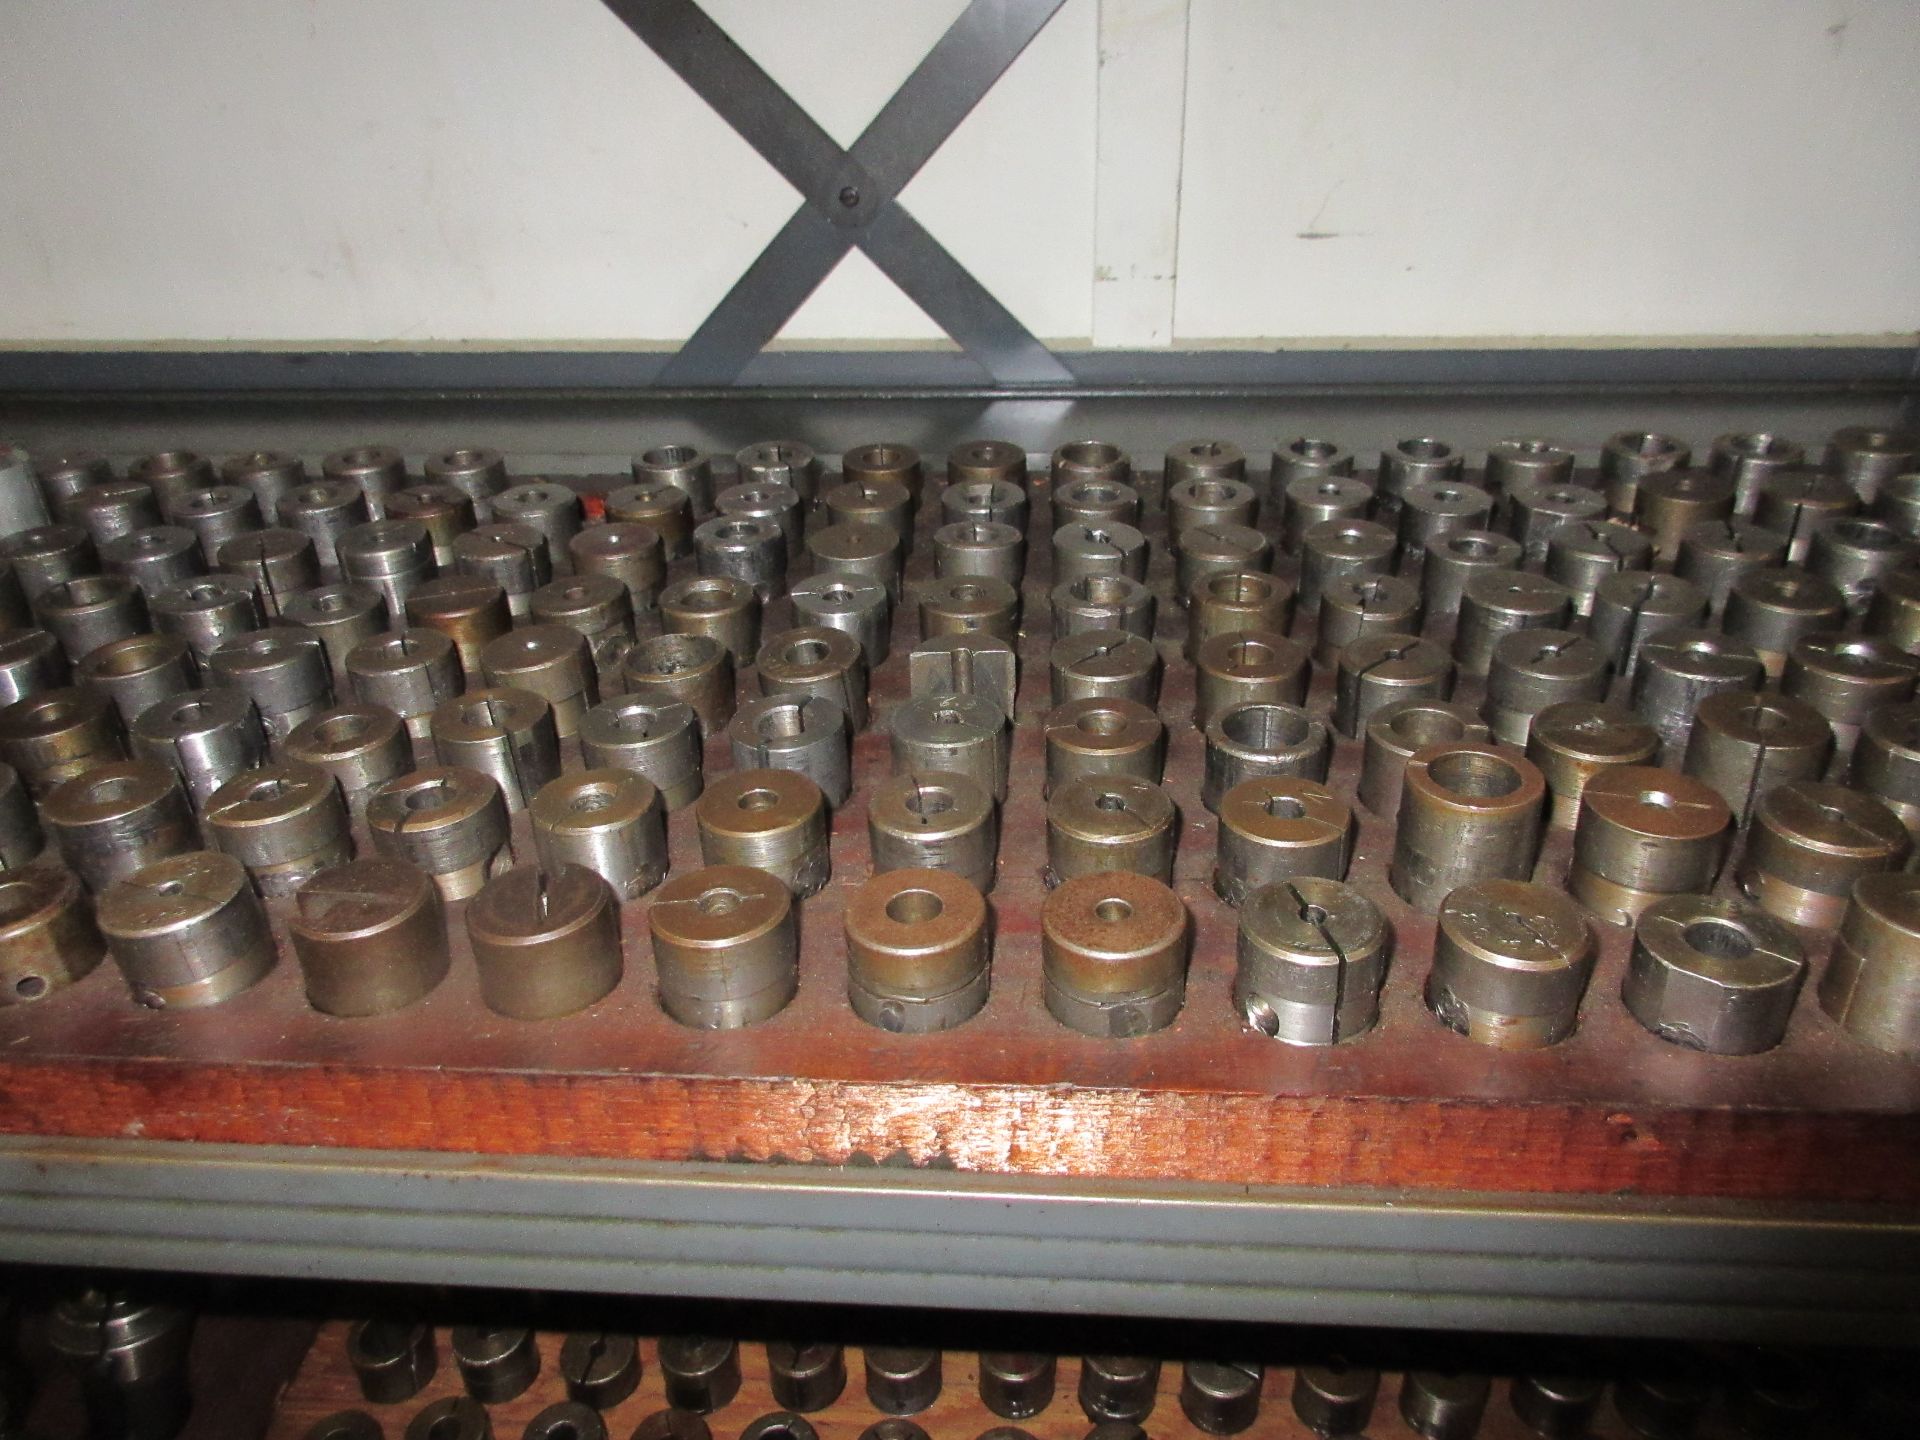 LOT Asst. Collets, Bushings, Drills, Chucks, Cutters, Tool Holders, Machine Parts, Knurling Tools in - Image 5 of 17